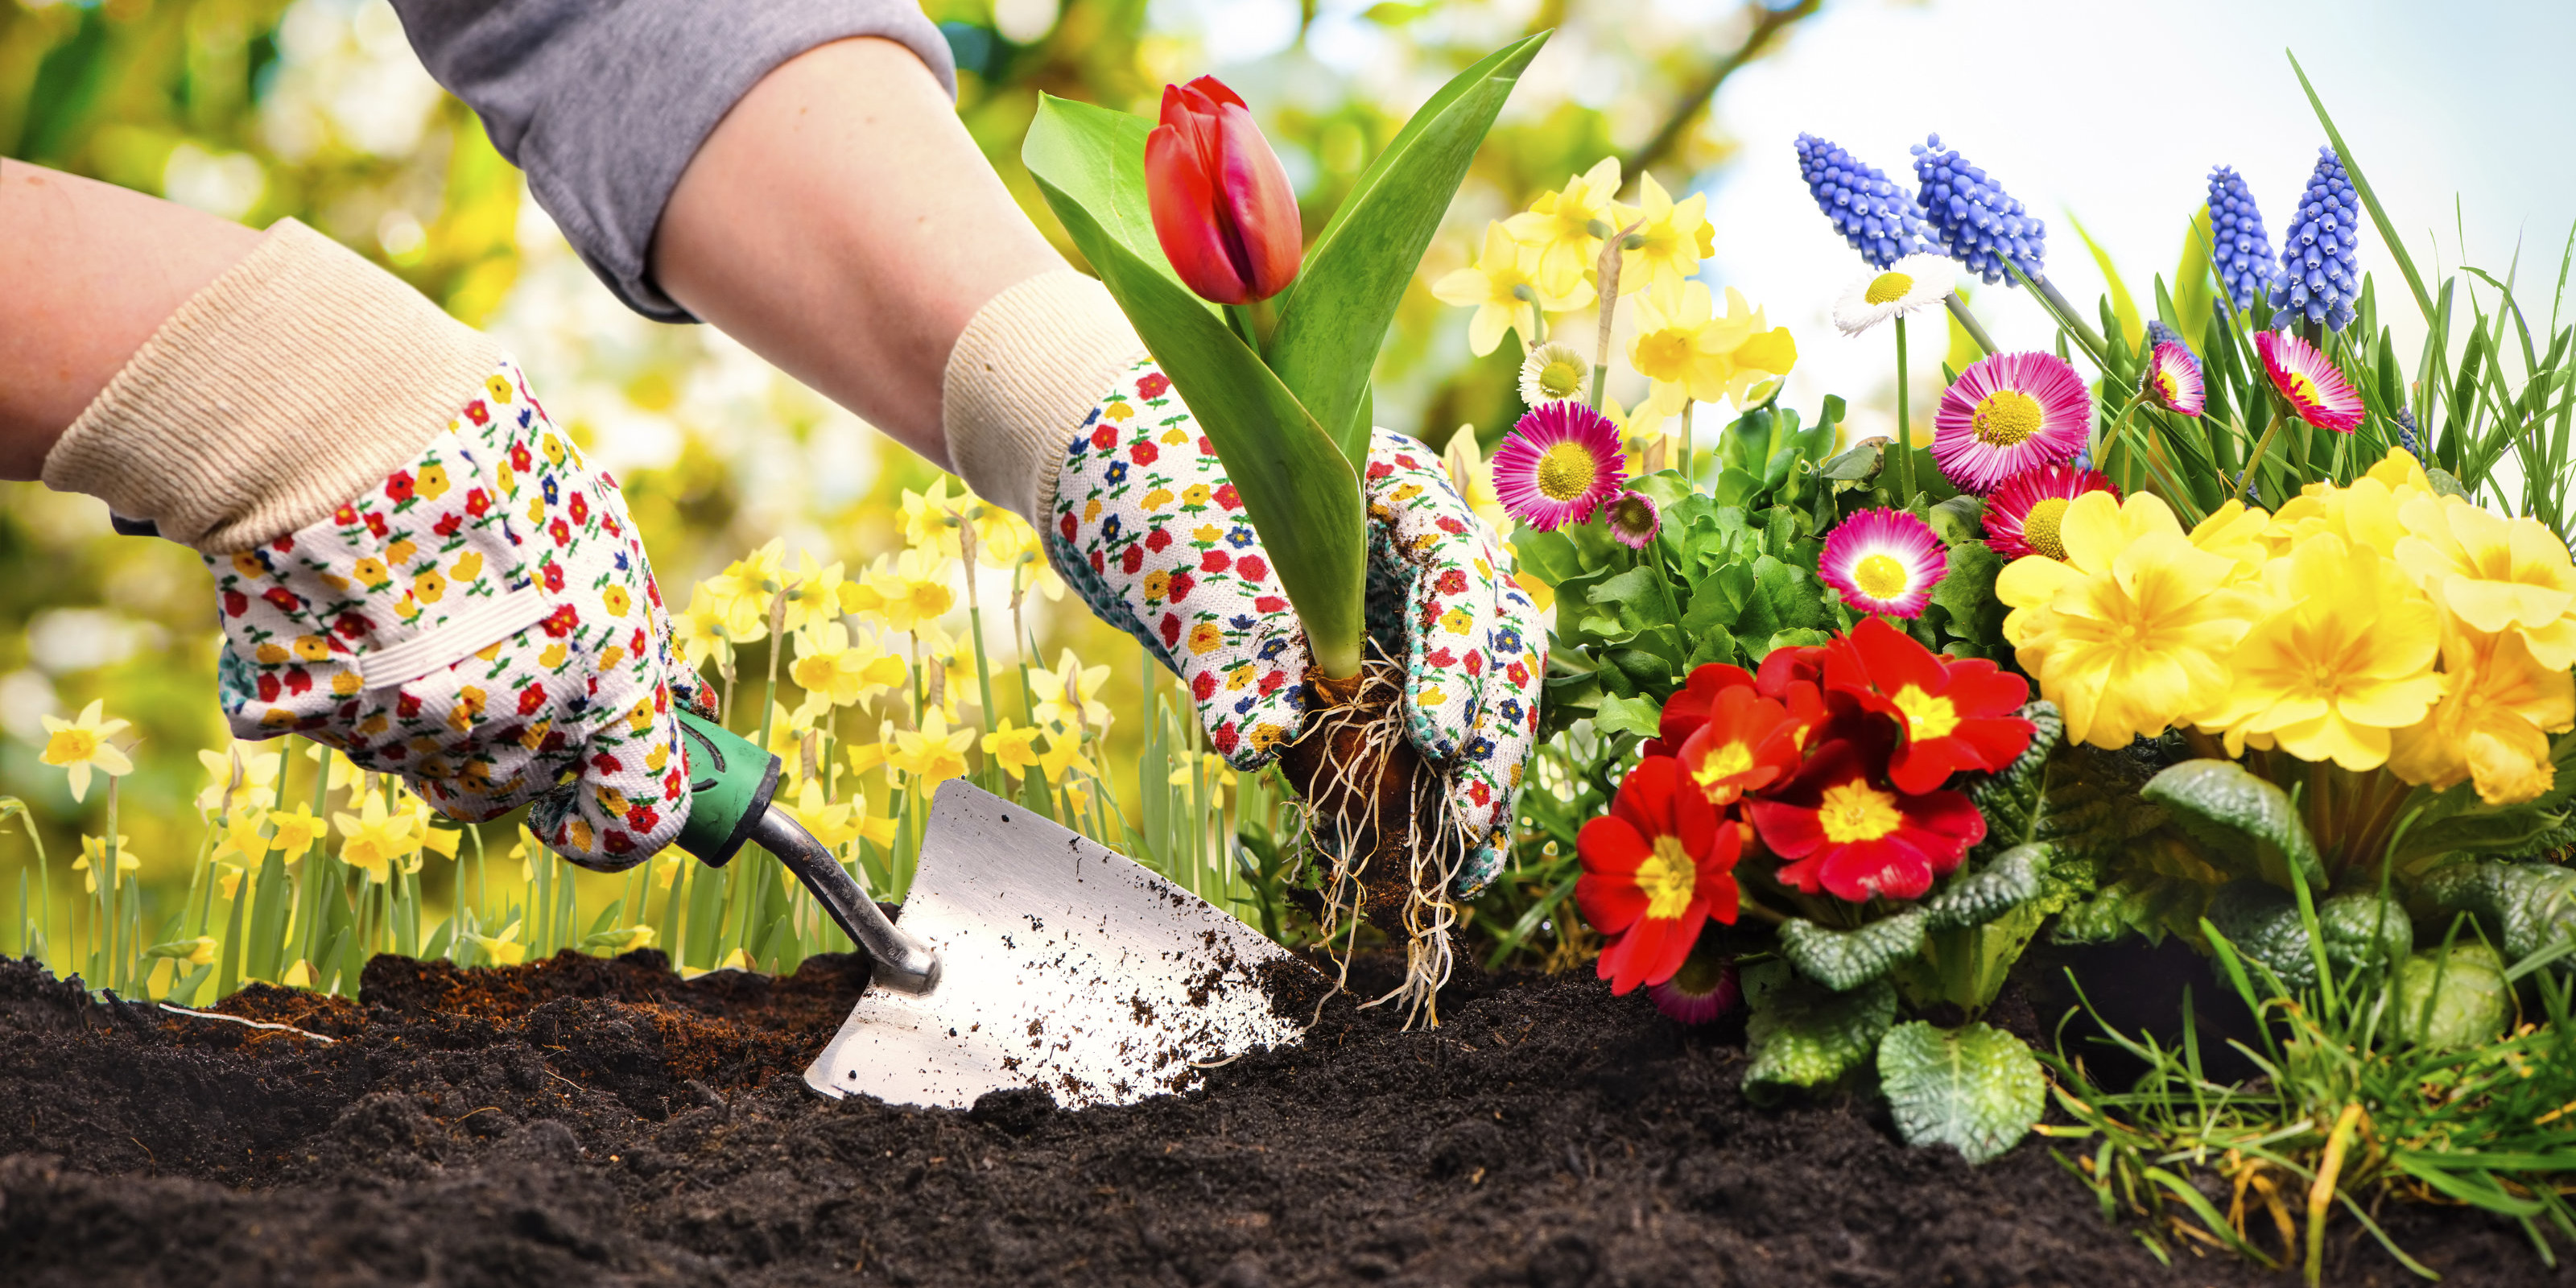 A person is digging a hole in soil and planting tulips.